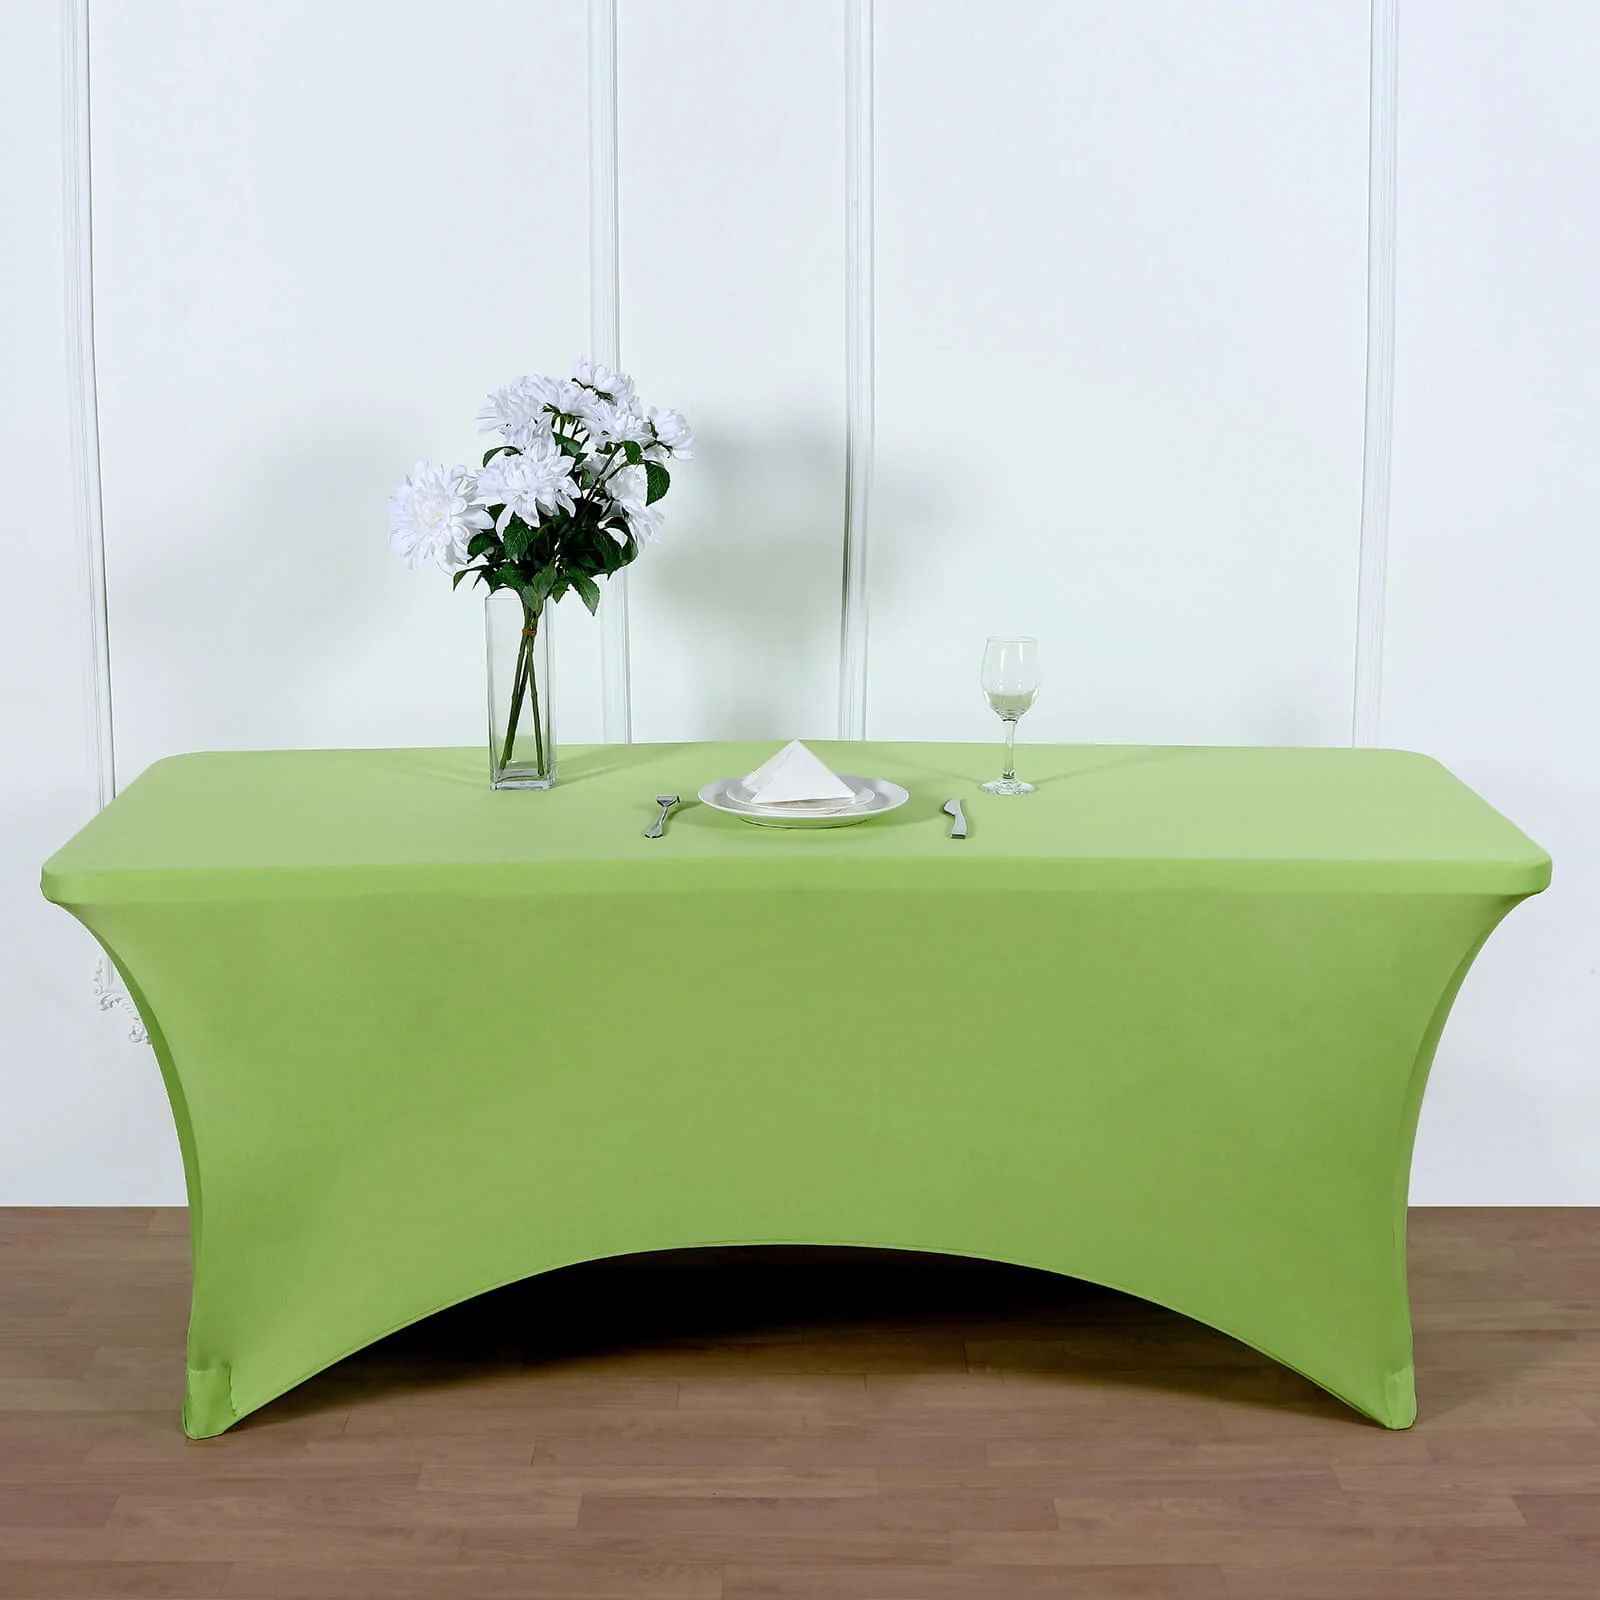 Apple Green - 6 Ft Rectangular Spandex Table Cover Wedding Party - £27.01 GBP